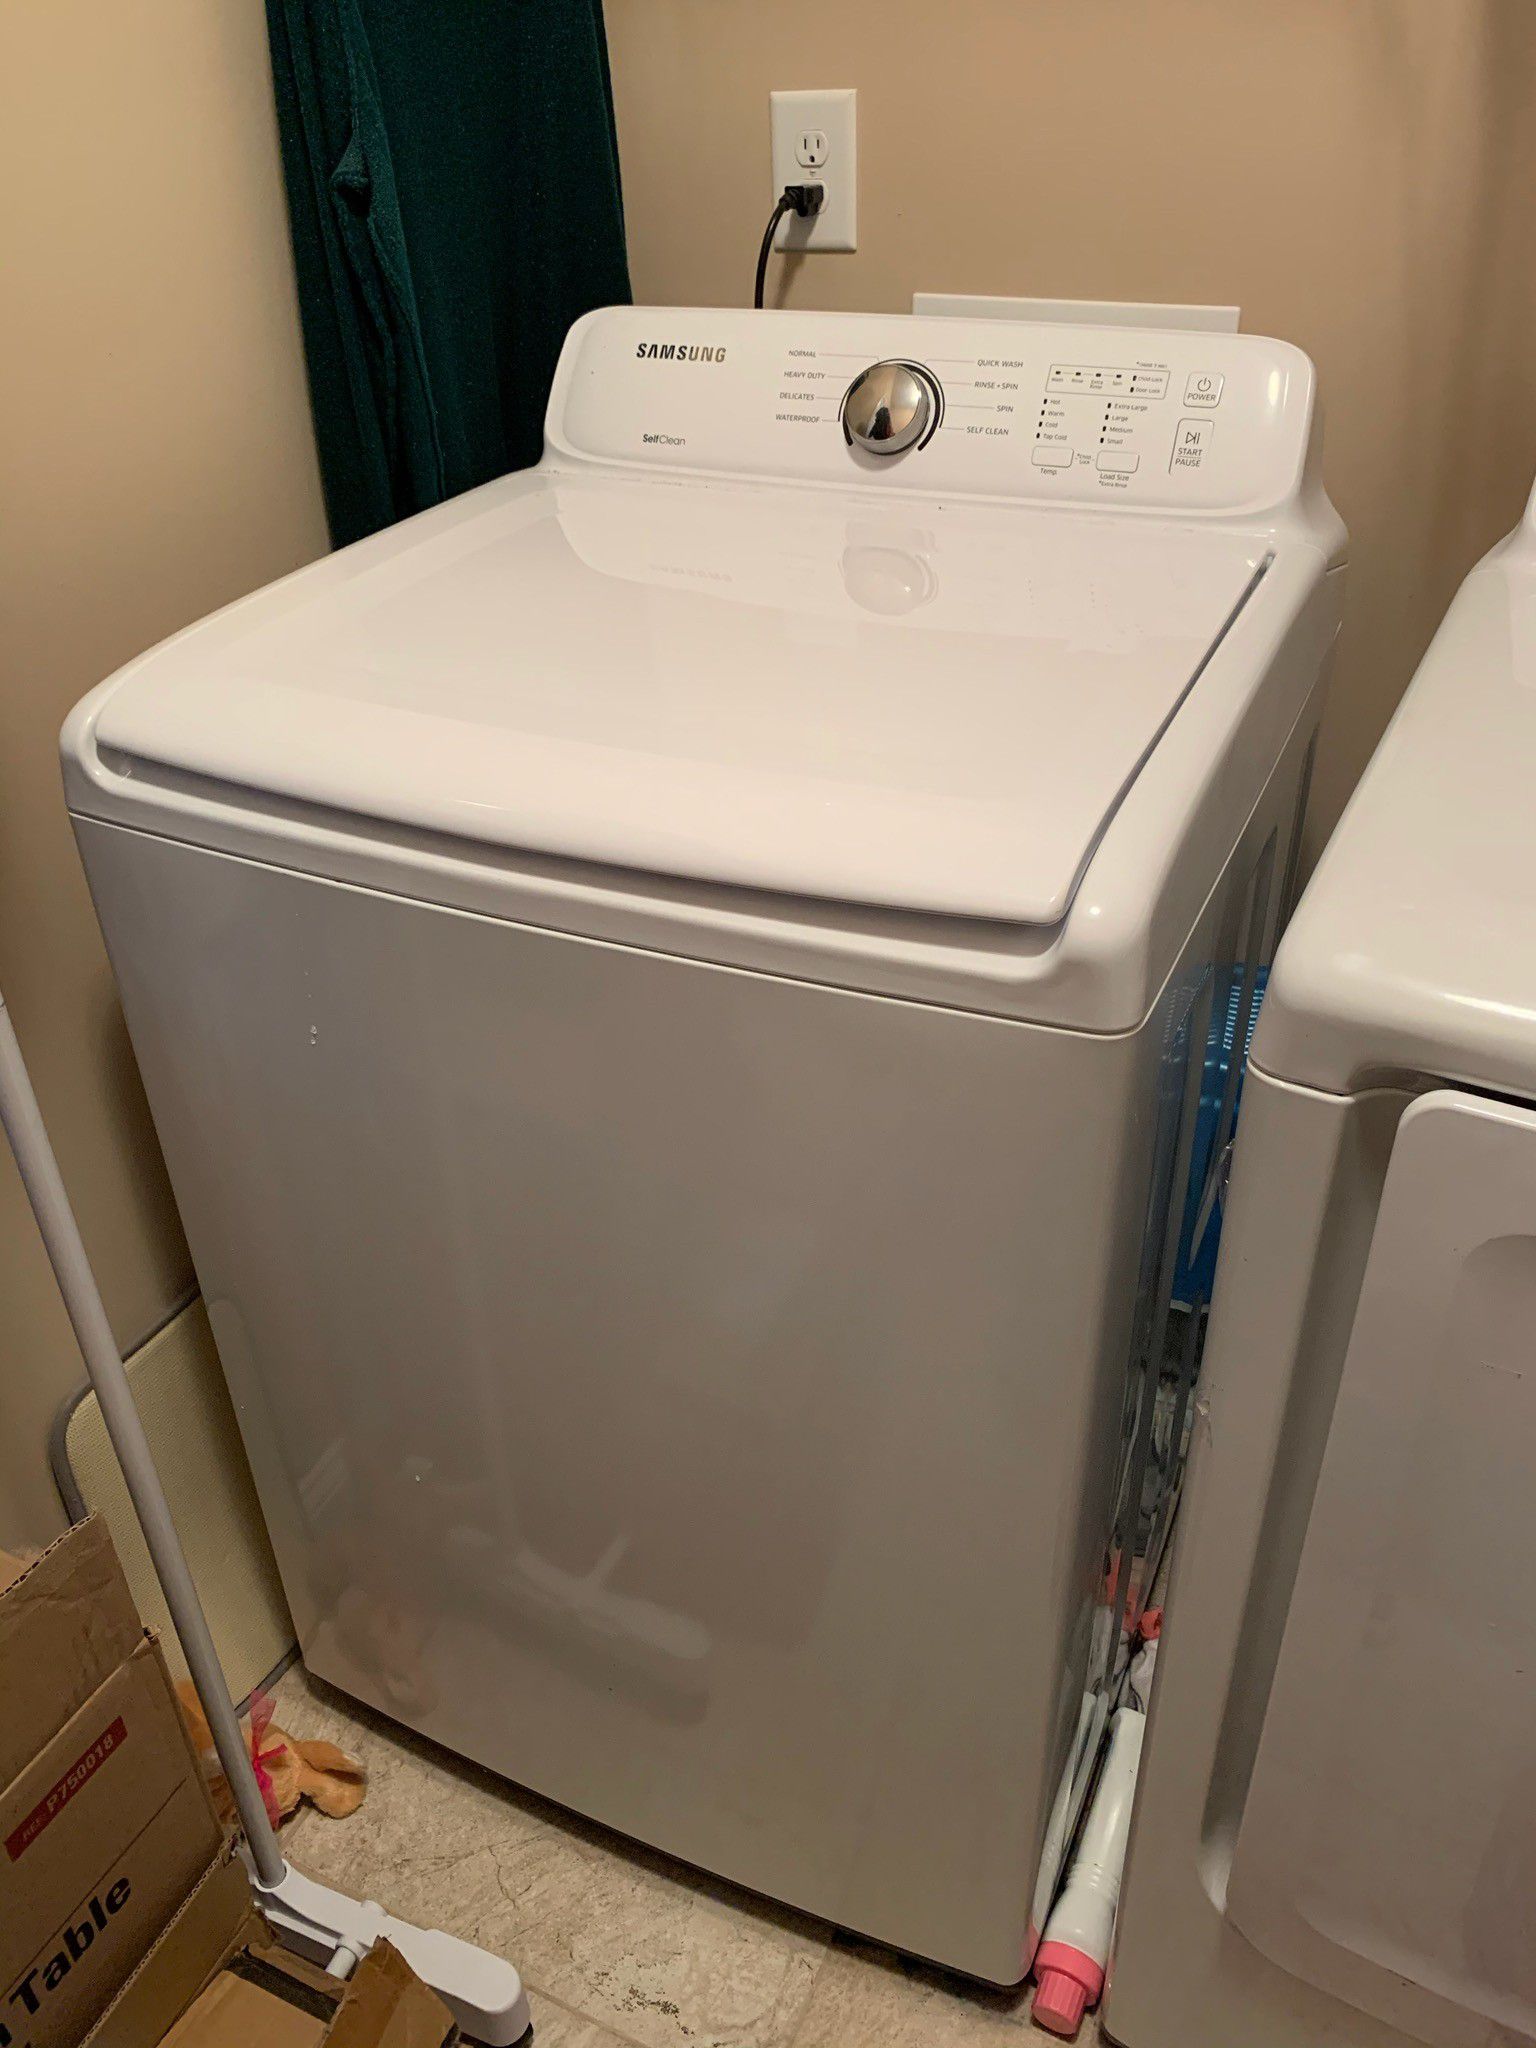 Samsung washer/dryer set 1 year old. Perfect working condition